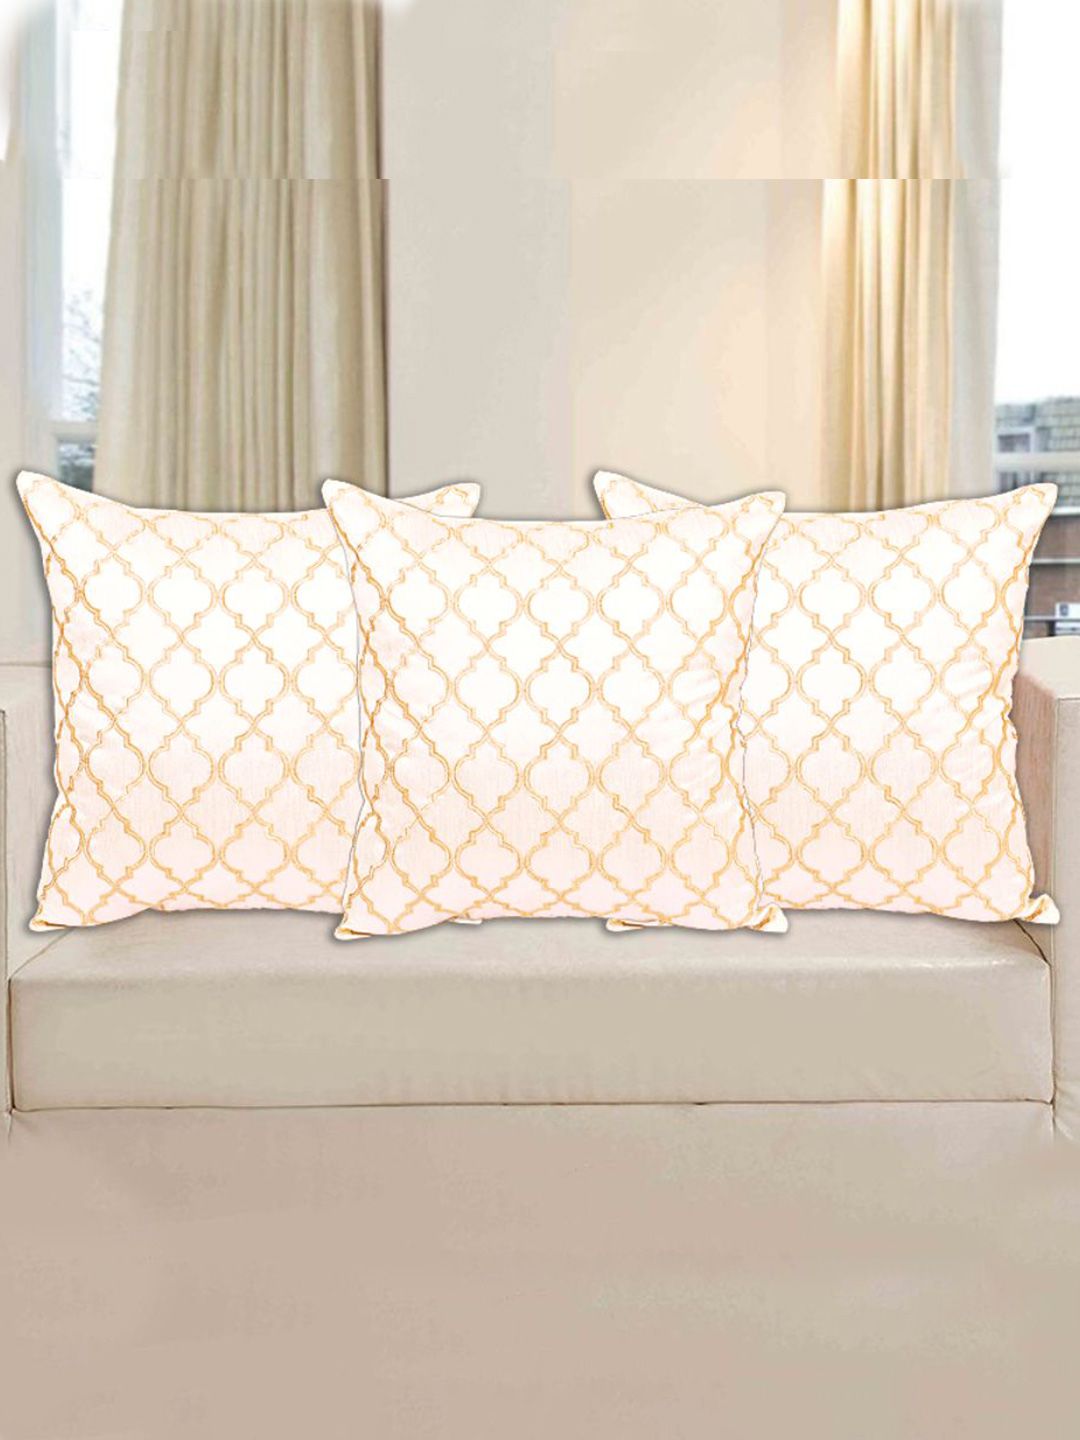 INDHOME LIFE Peach-Coloured & Gold-Toned Set of 3 Embroidered Square Cushion Covers Price in India